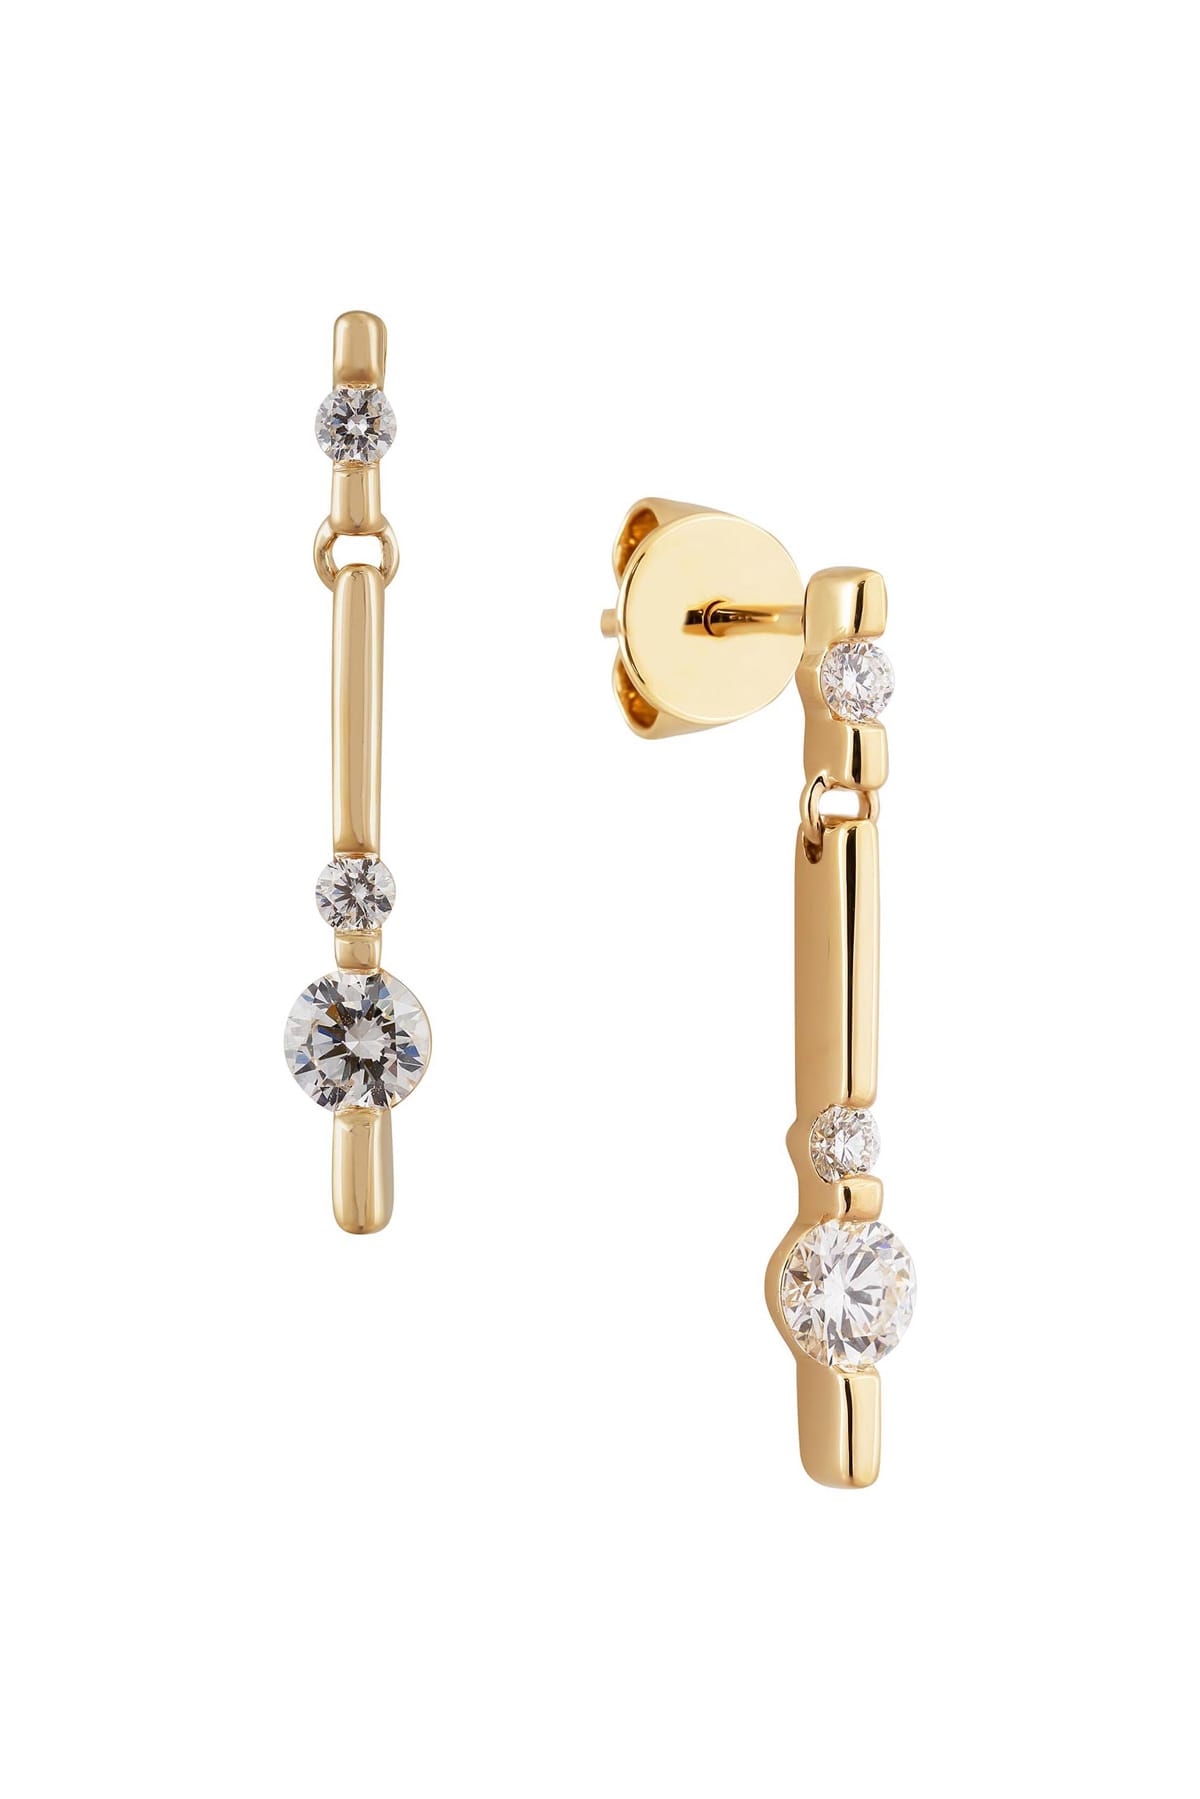 Drop Bar Style Diamond Stud Earrings set in 18ct Yellow Gold available at LeGassick Diamonds and Jewellery Gold Coast, Australia.